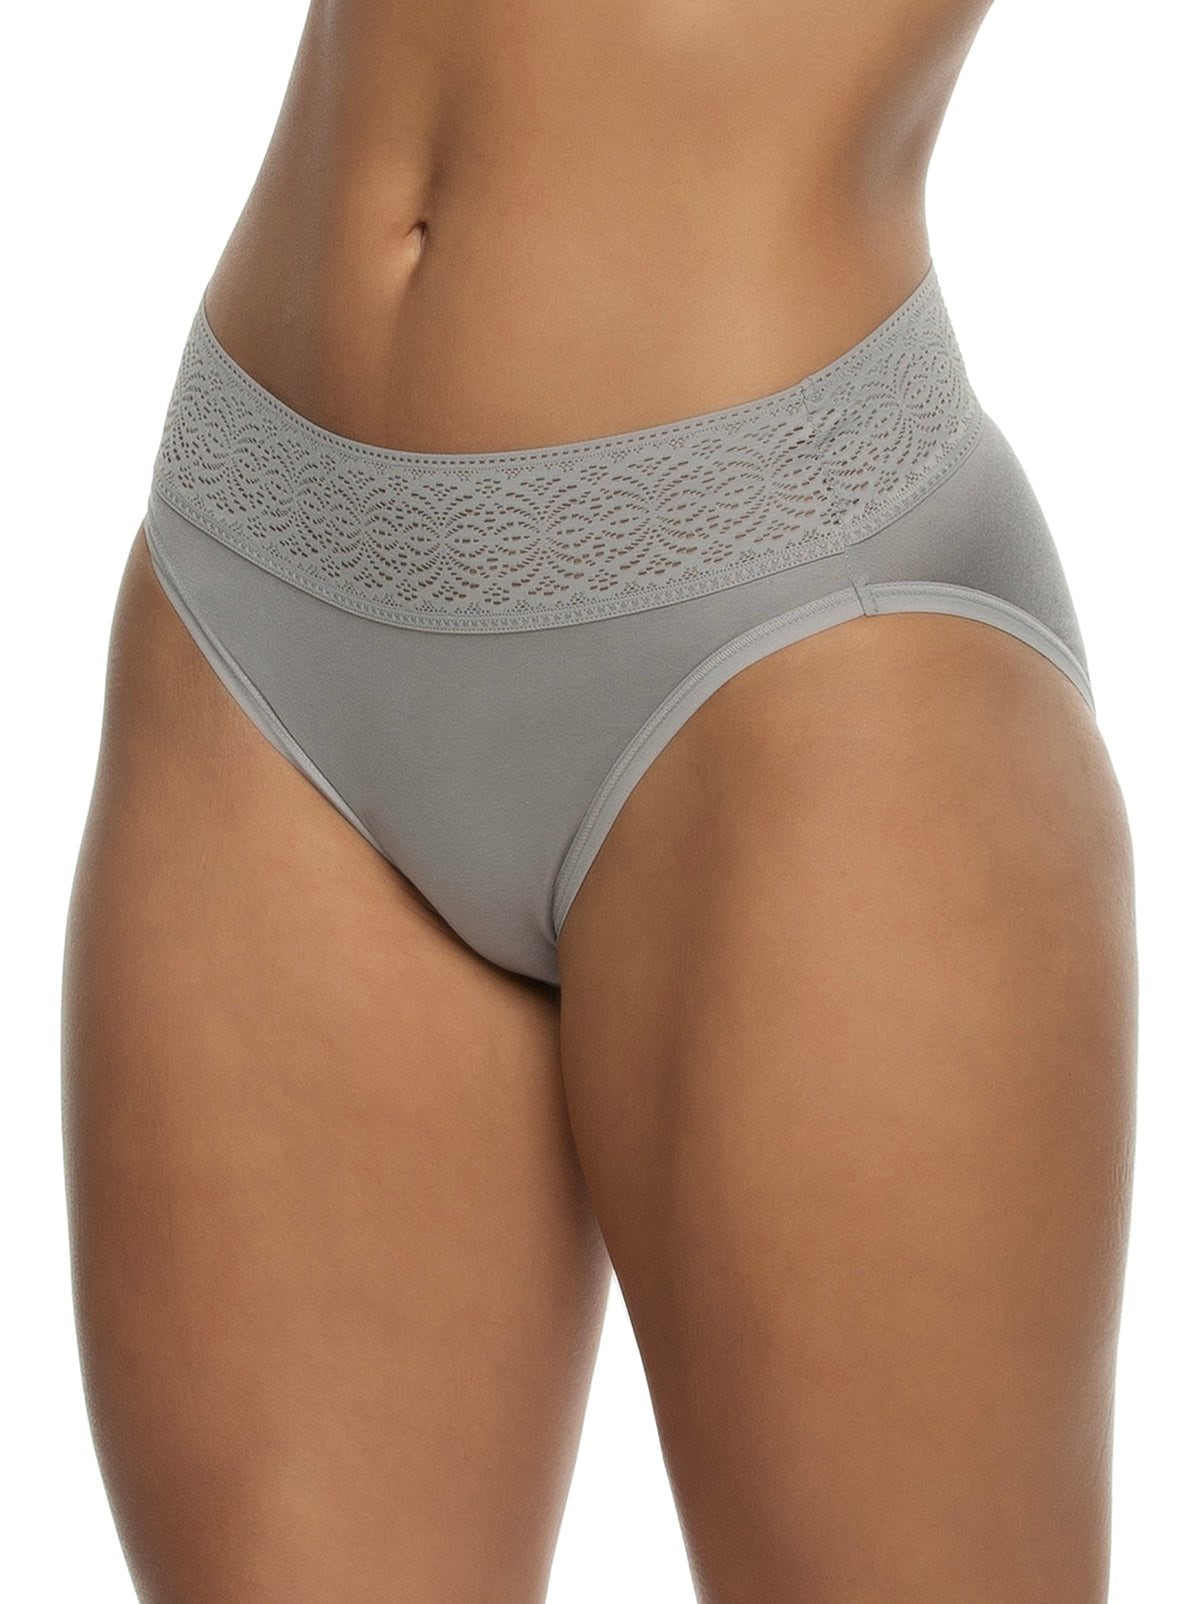 Felina, Super Stretchy Lace Top Low Rise Thong